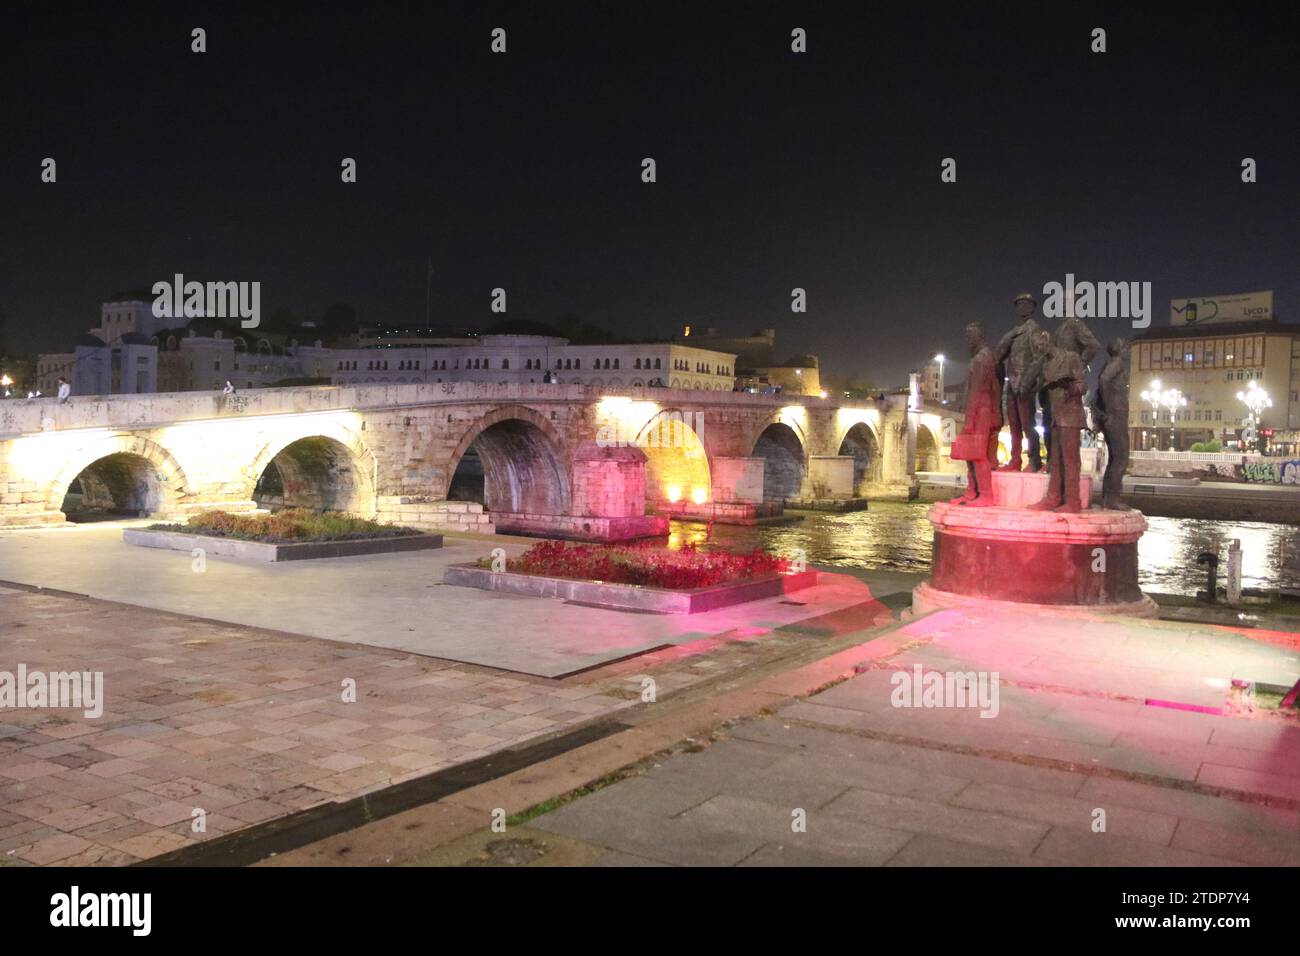 The famous Stone Bridge at nighttime in Skopje, with the Attentators of Solun & Gemidzhii Monument to the right (Boatmen of Thessaloniki). The bridge goes over the Vardar River. Stock Photo